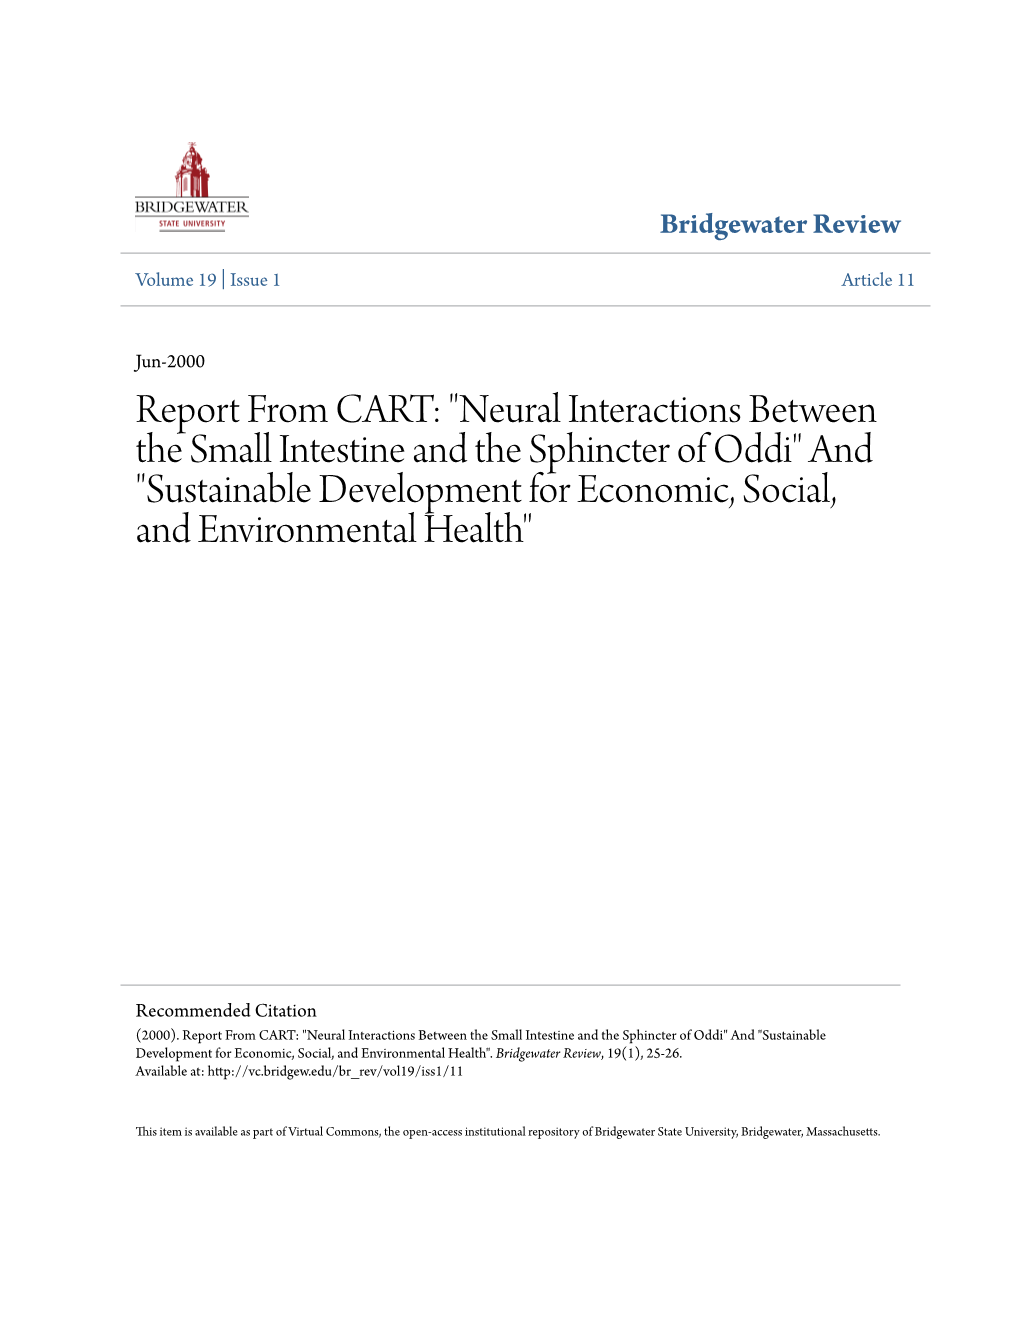 "Neural Interactions Between the Small Intestine and the Sphincter of Oddi" and "Sustainable Development for Economic, Social, and Environmental Health"